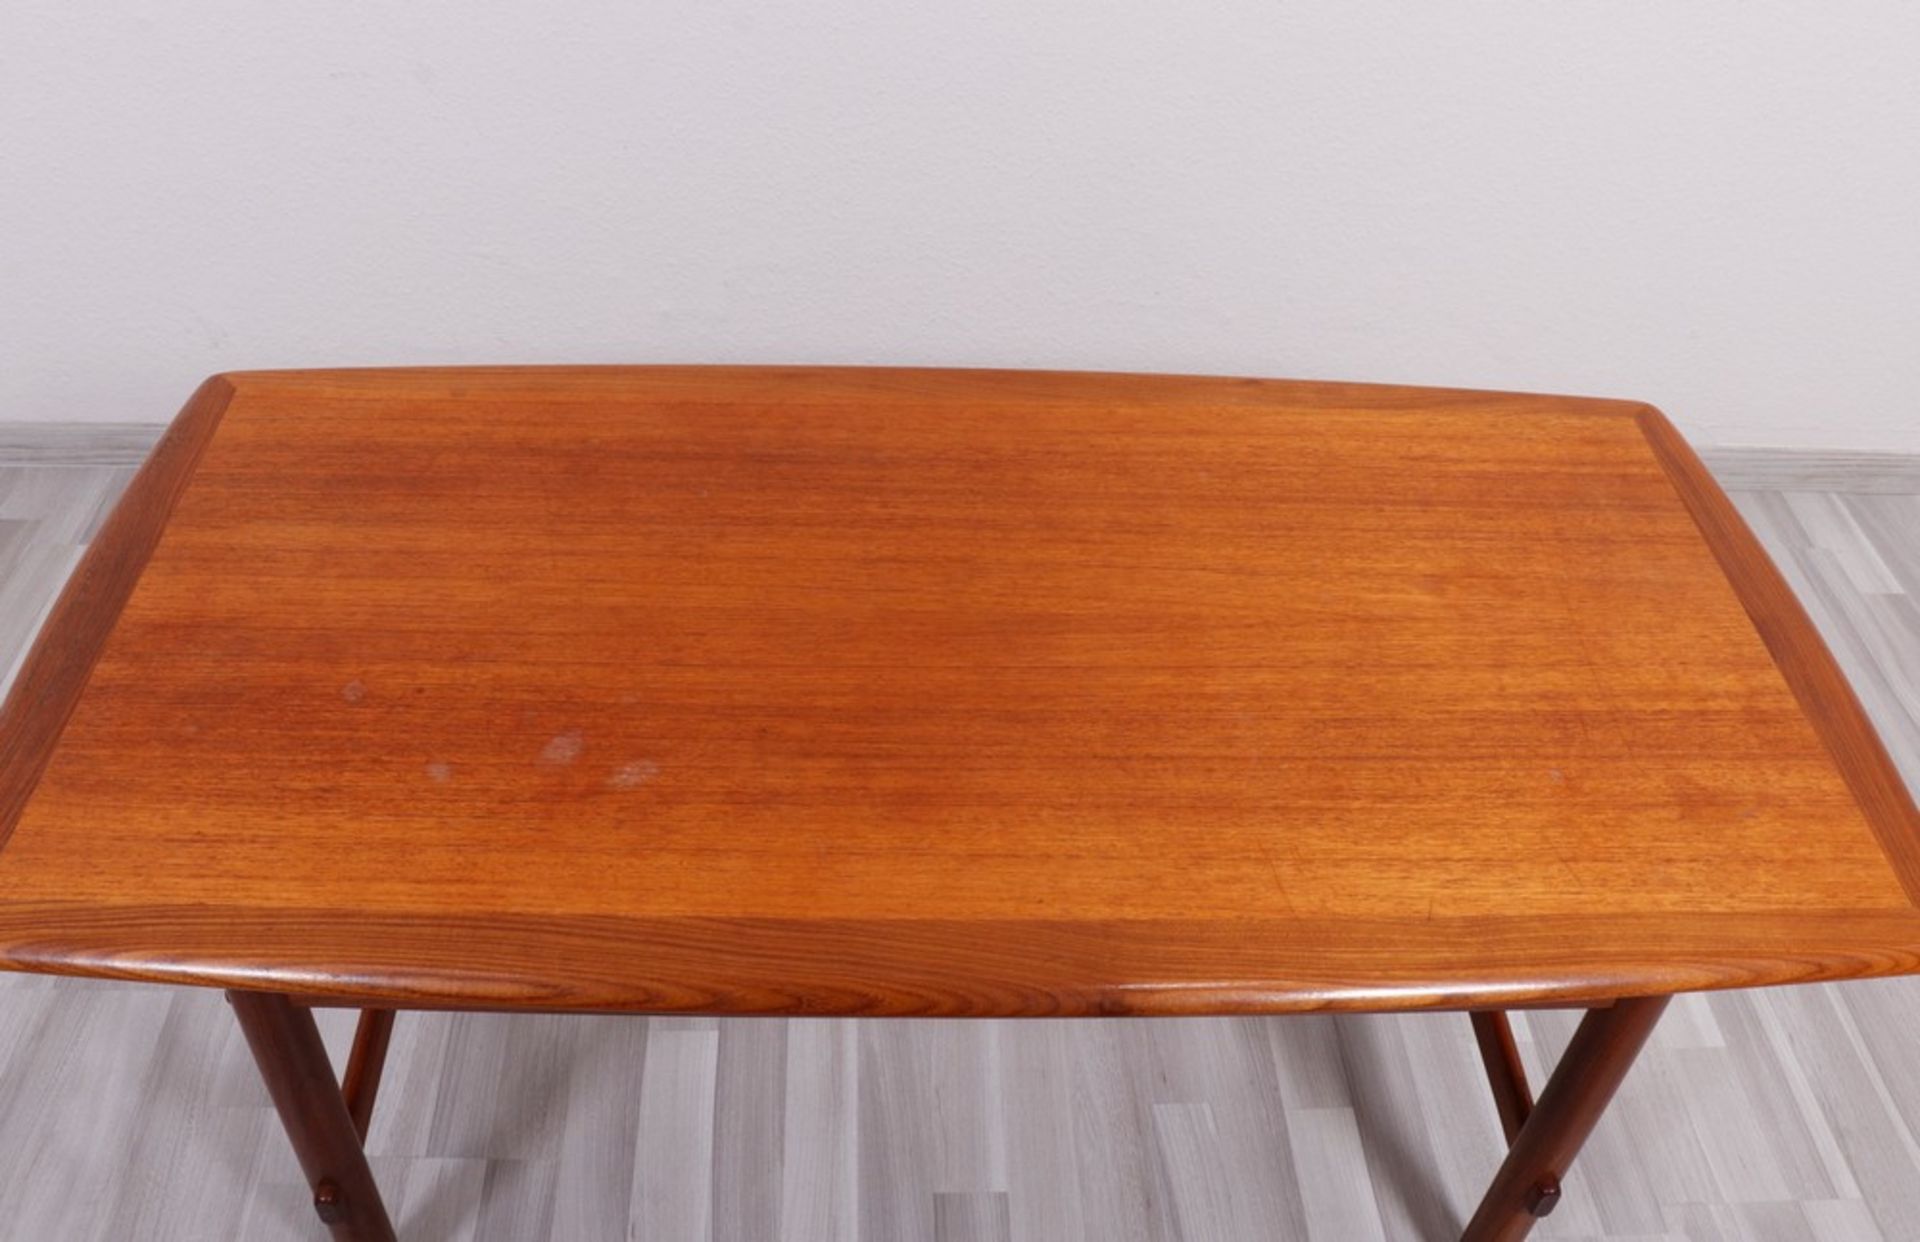 Sofa table, probably Denmark, 1960s - Image 2 of 3